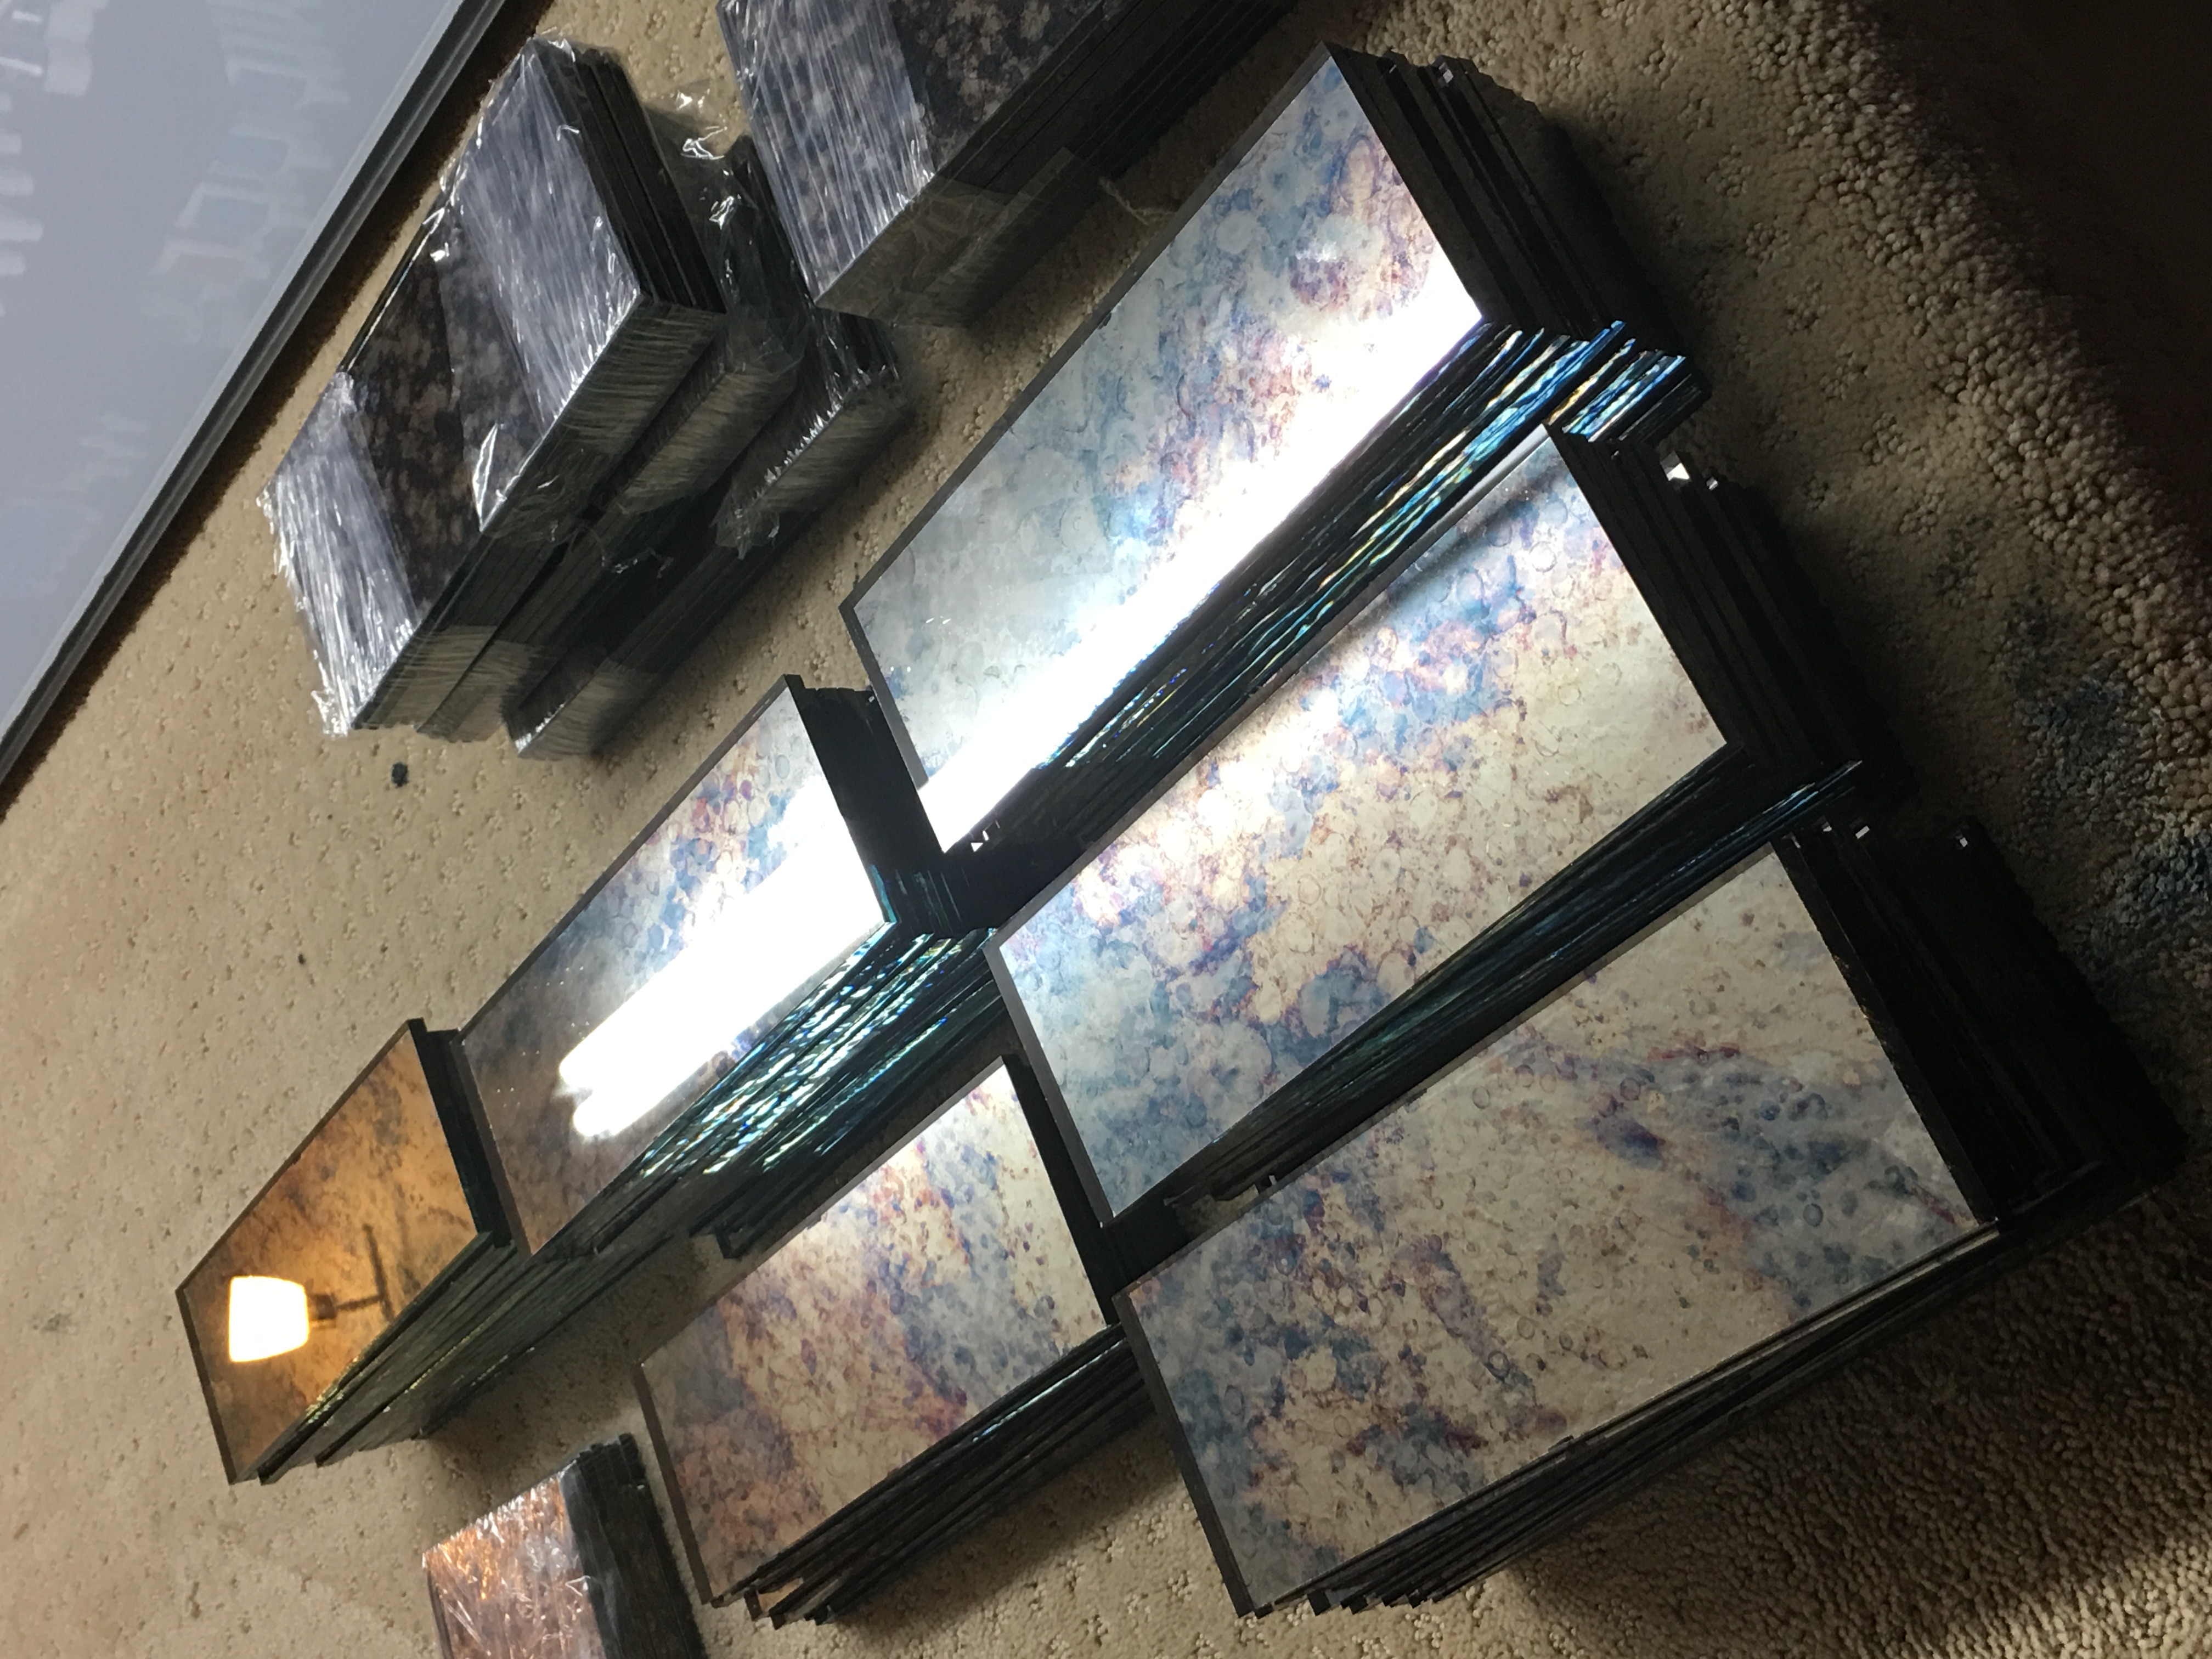 Antique Mirror Tiles  The Glass Shoppe A Division of Builders Glass of  Bonita, Inc.